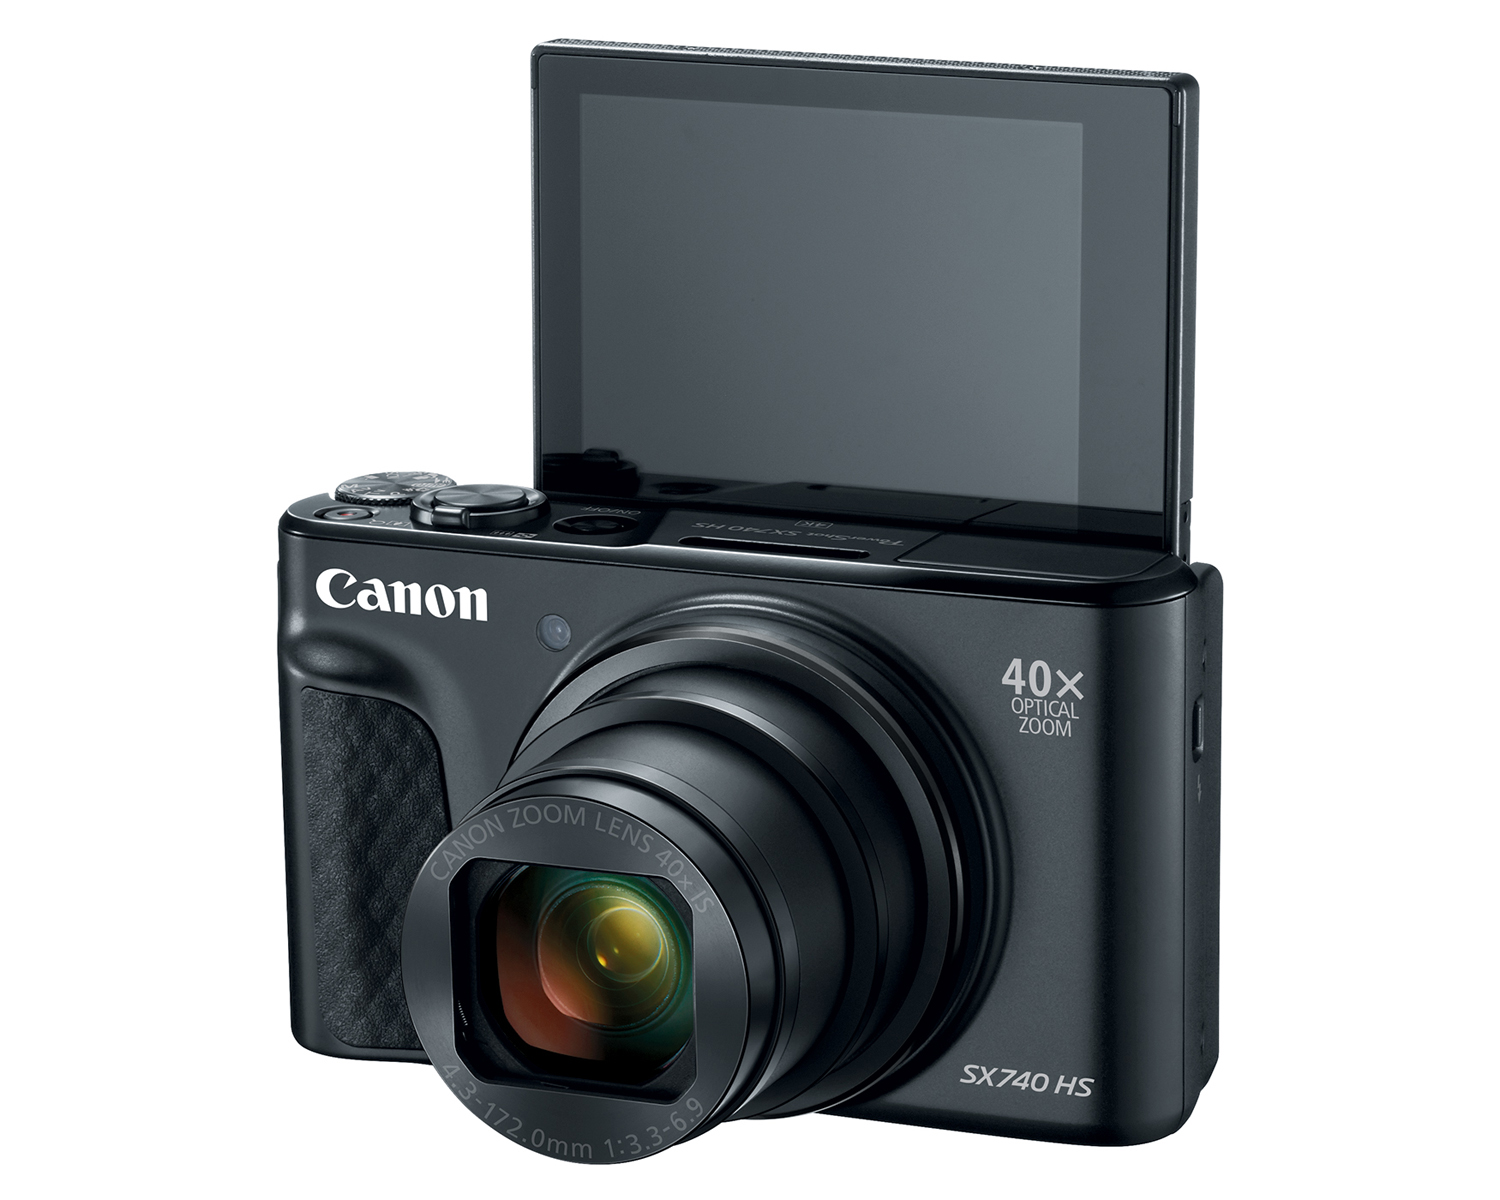 The Canon PowerShot SX740 HS Does Something Their Higher End DSLRs Don't